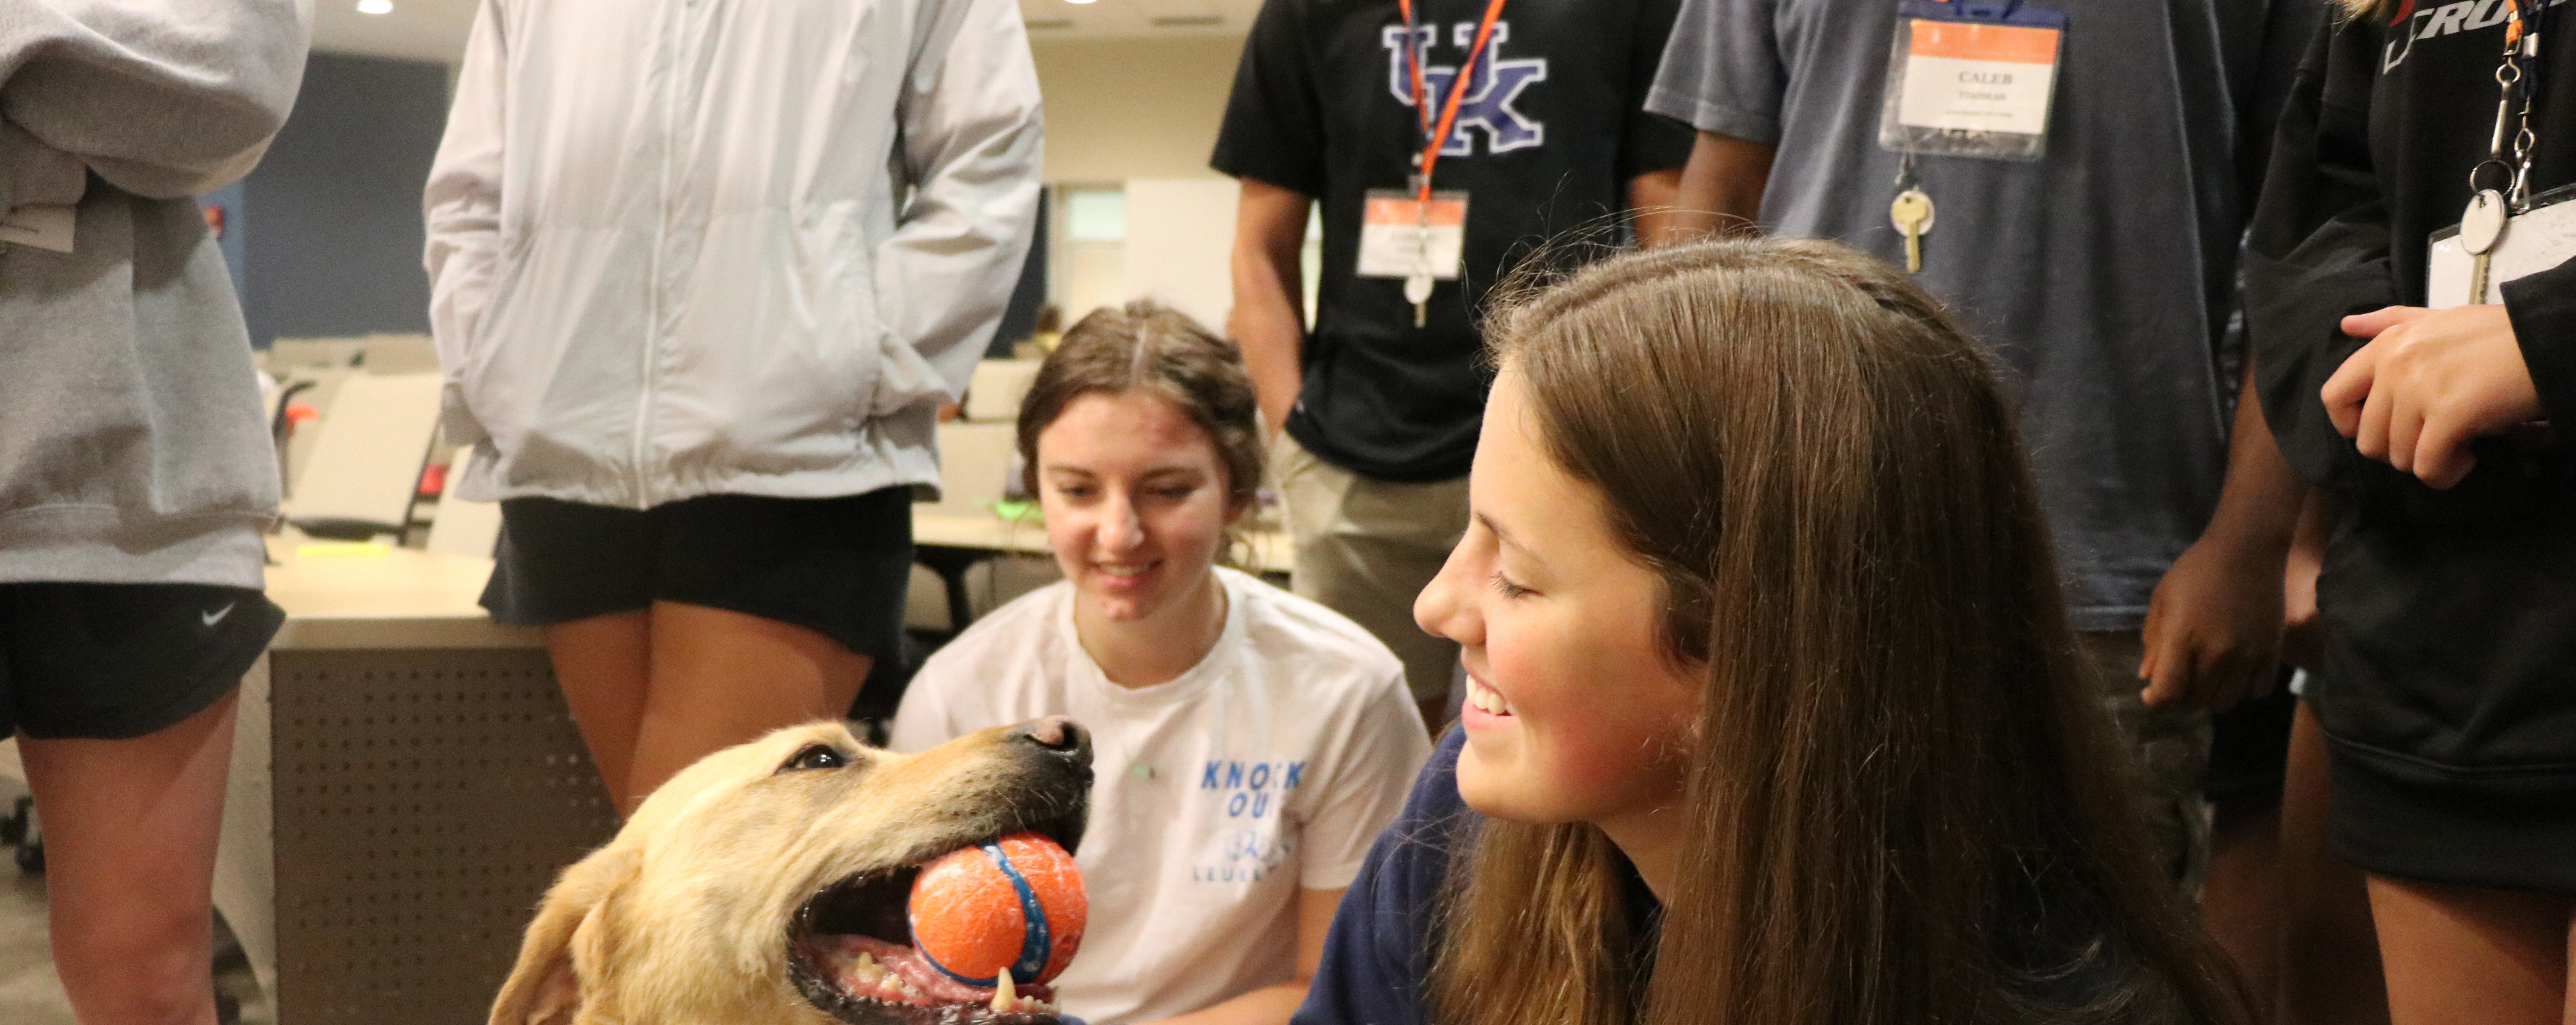 Campers play with a dog who is holding a ball in its mouth.